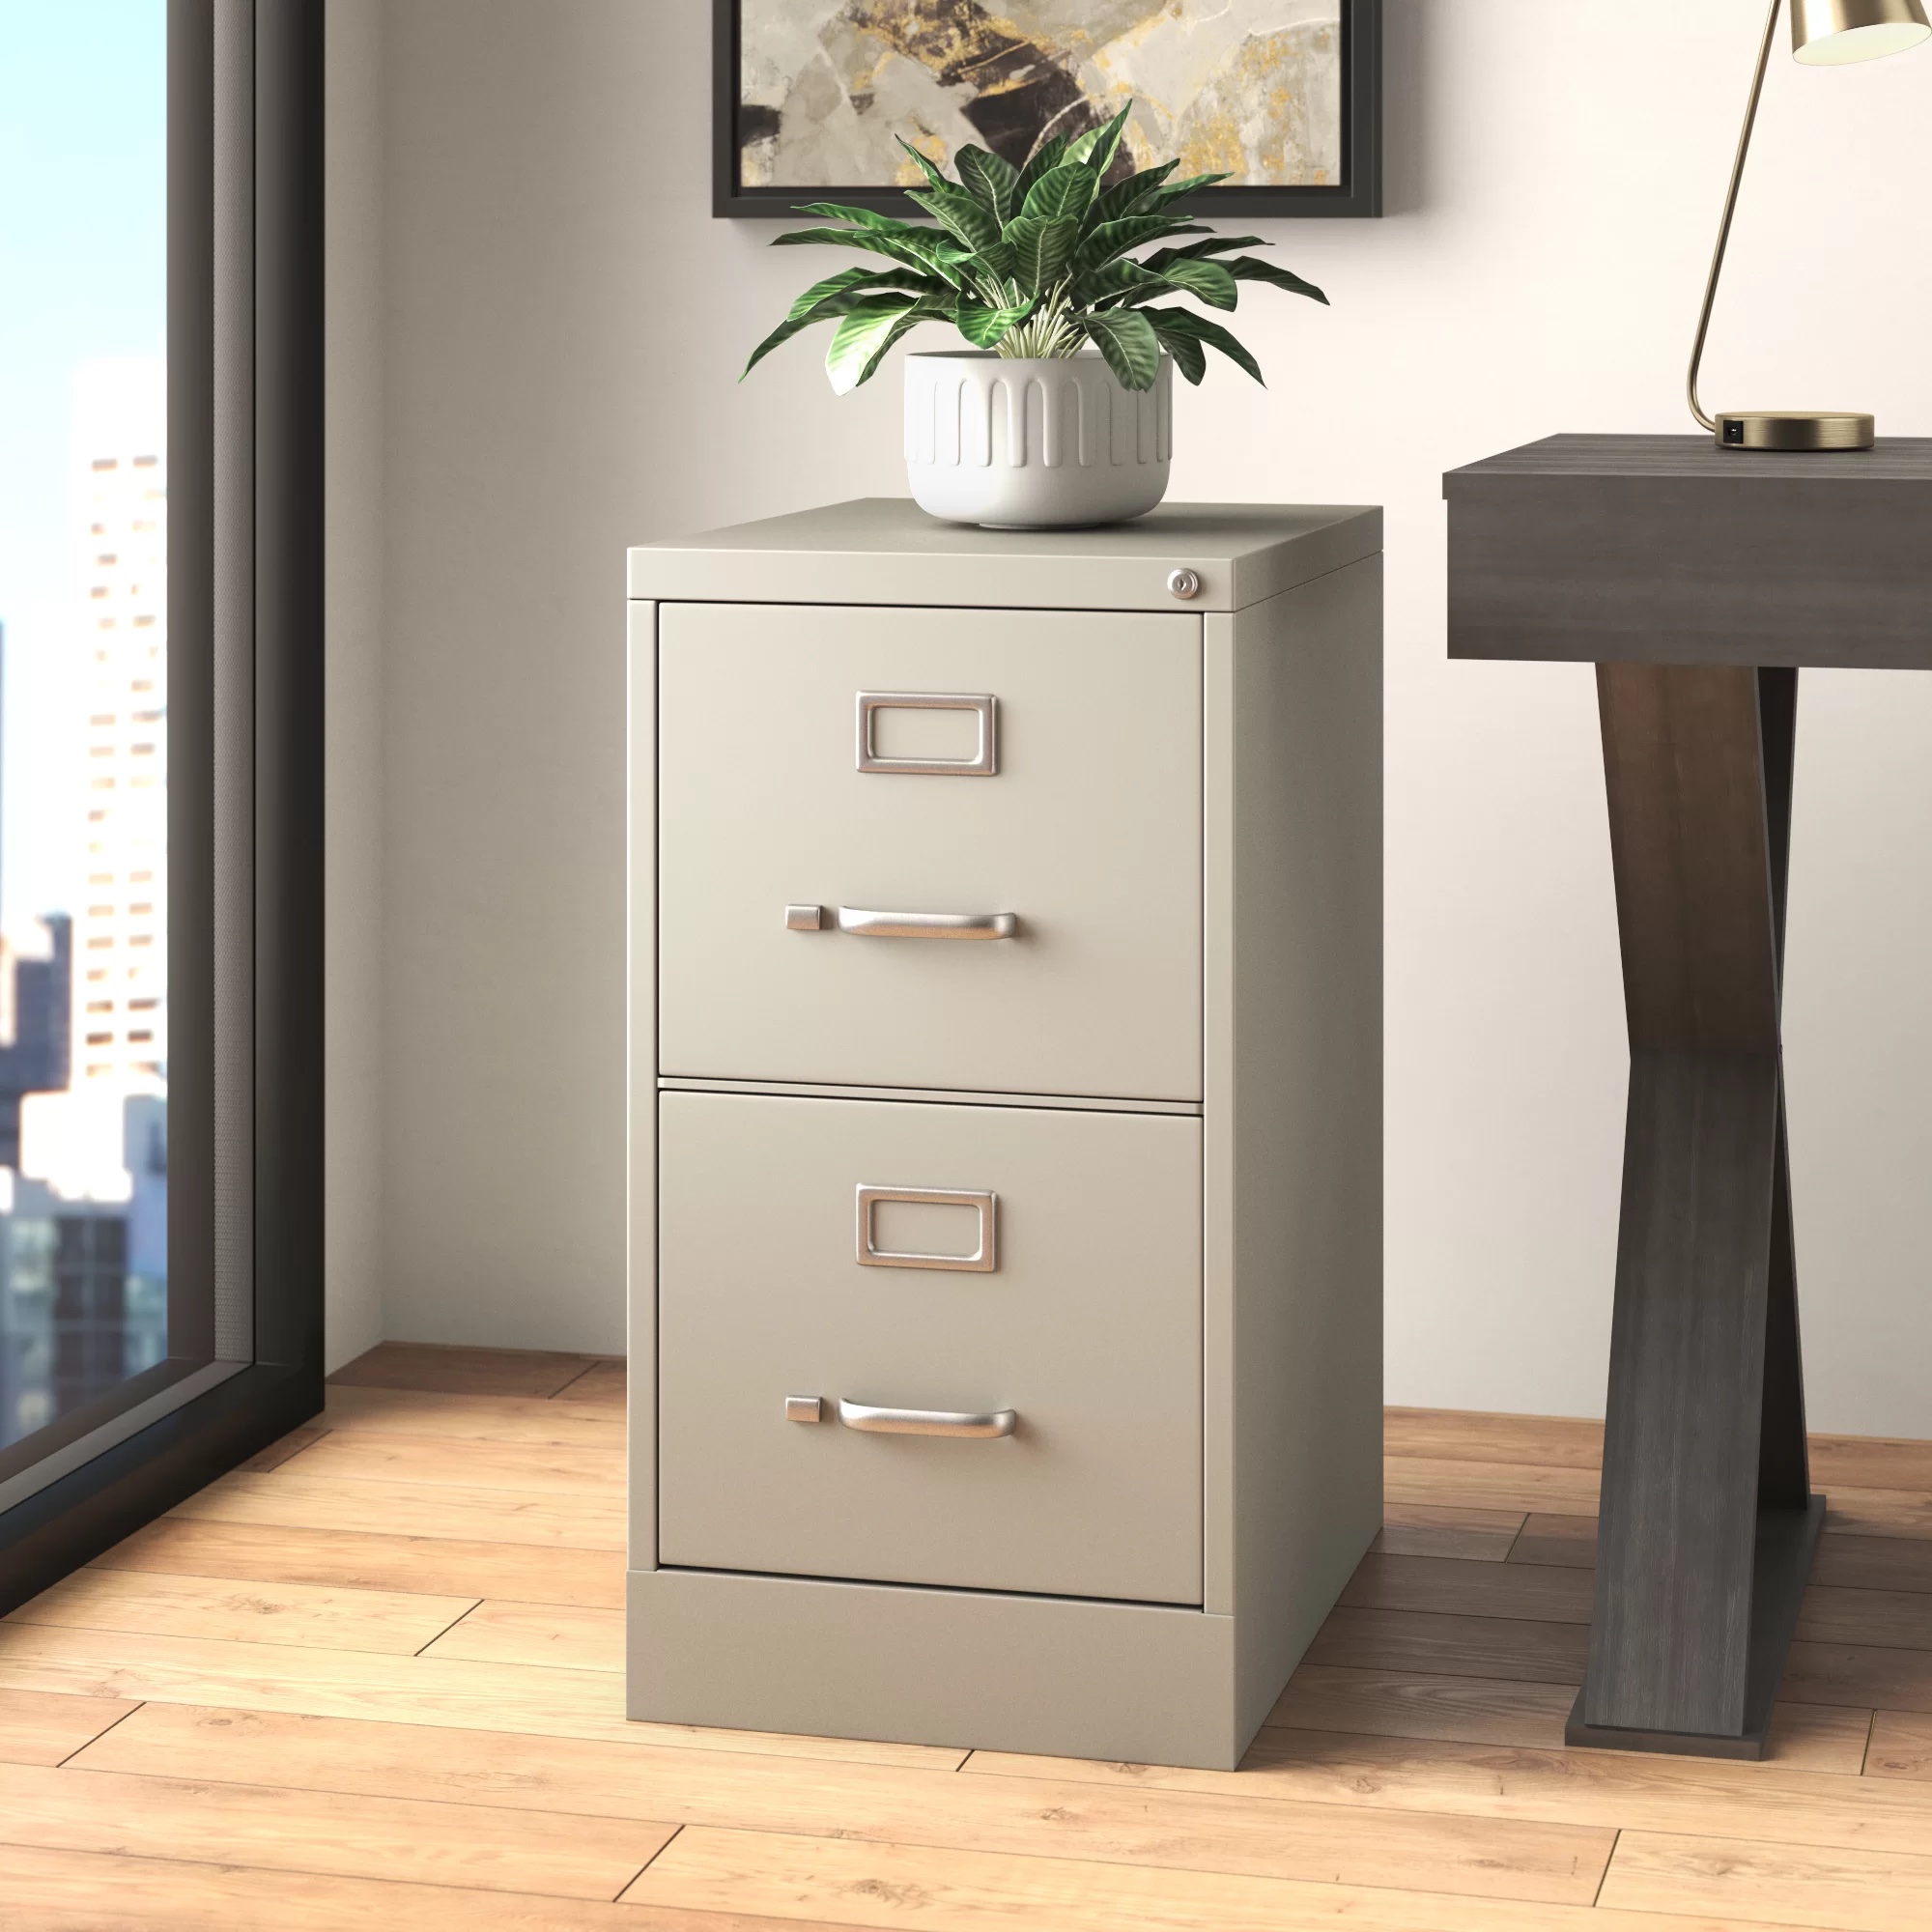 These Are The 12 Best File Cabinets For Your Home Office Hunker